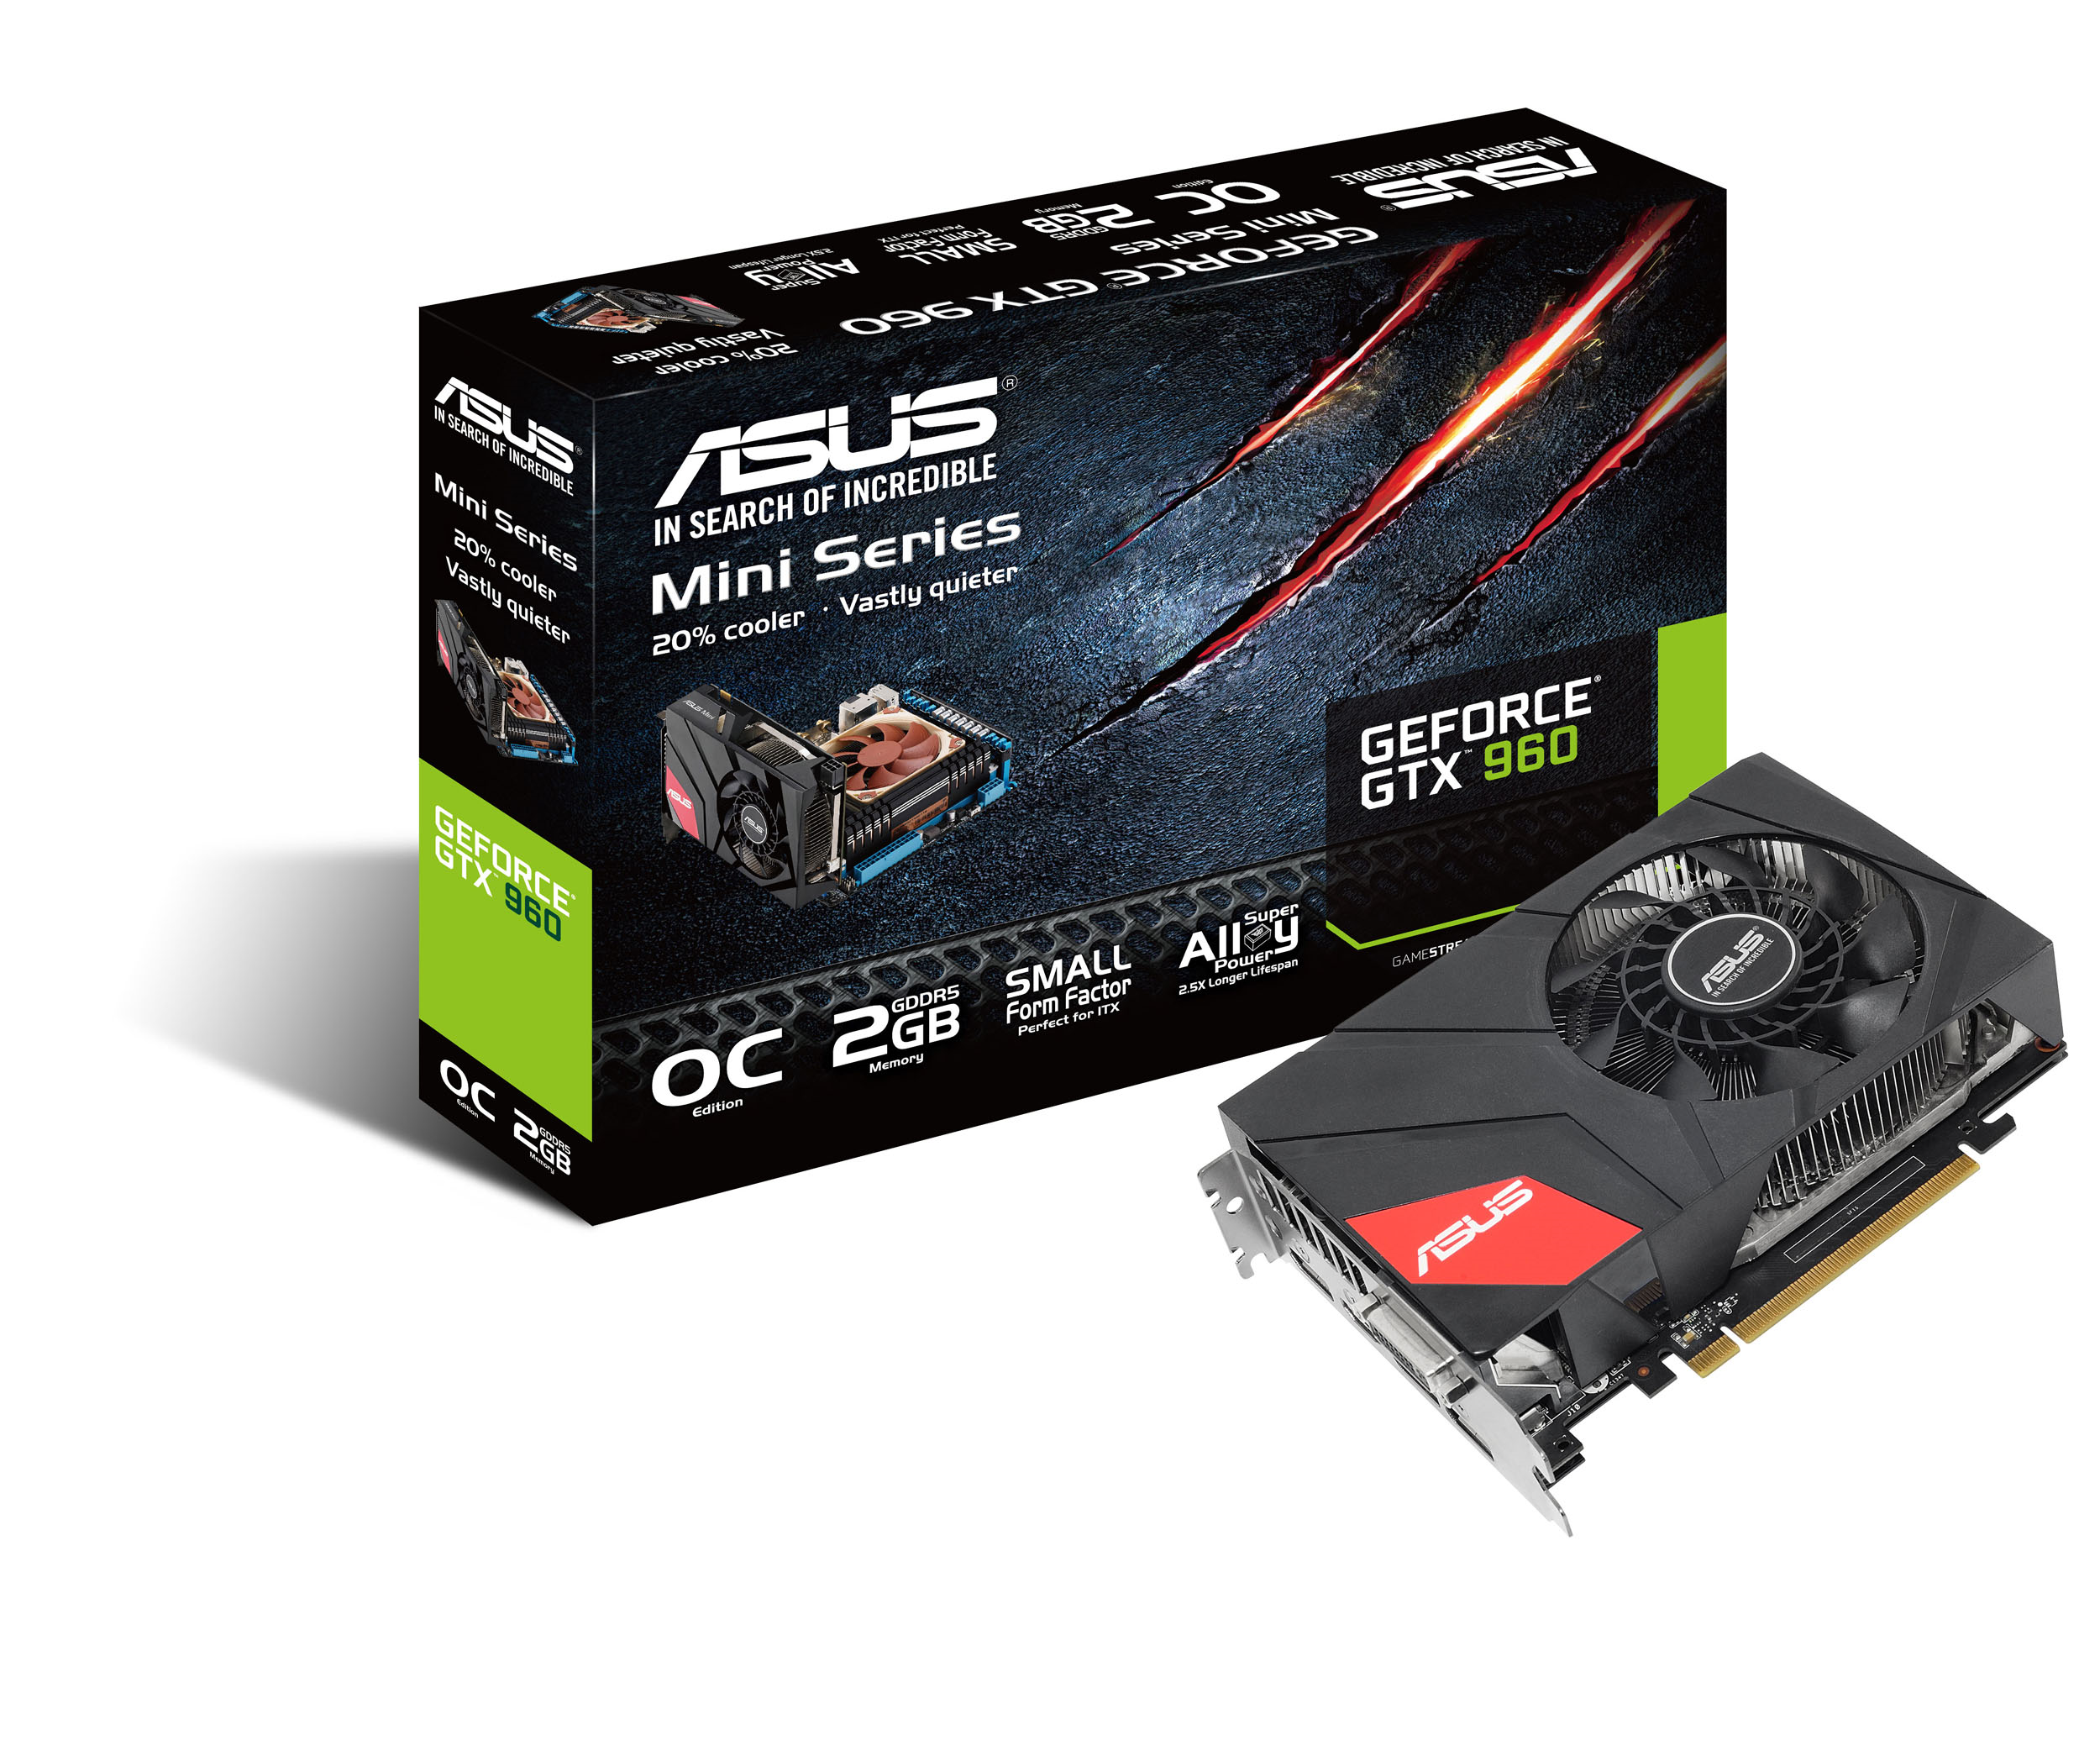 Media asset in full size related to 3dfxzone.it news item entitled as follows: ASUS lancia la card factory-overclocked GeForce GTX 960 Mini | Image Name: news22230_ASUS-GeForce-GTX-960-Mini_2.png